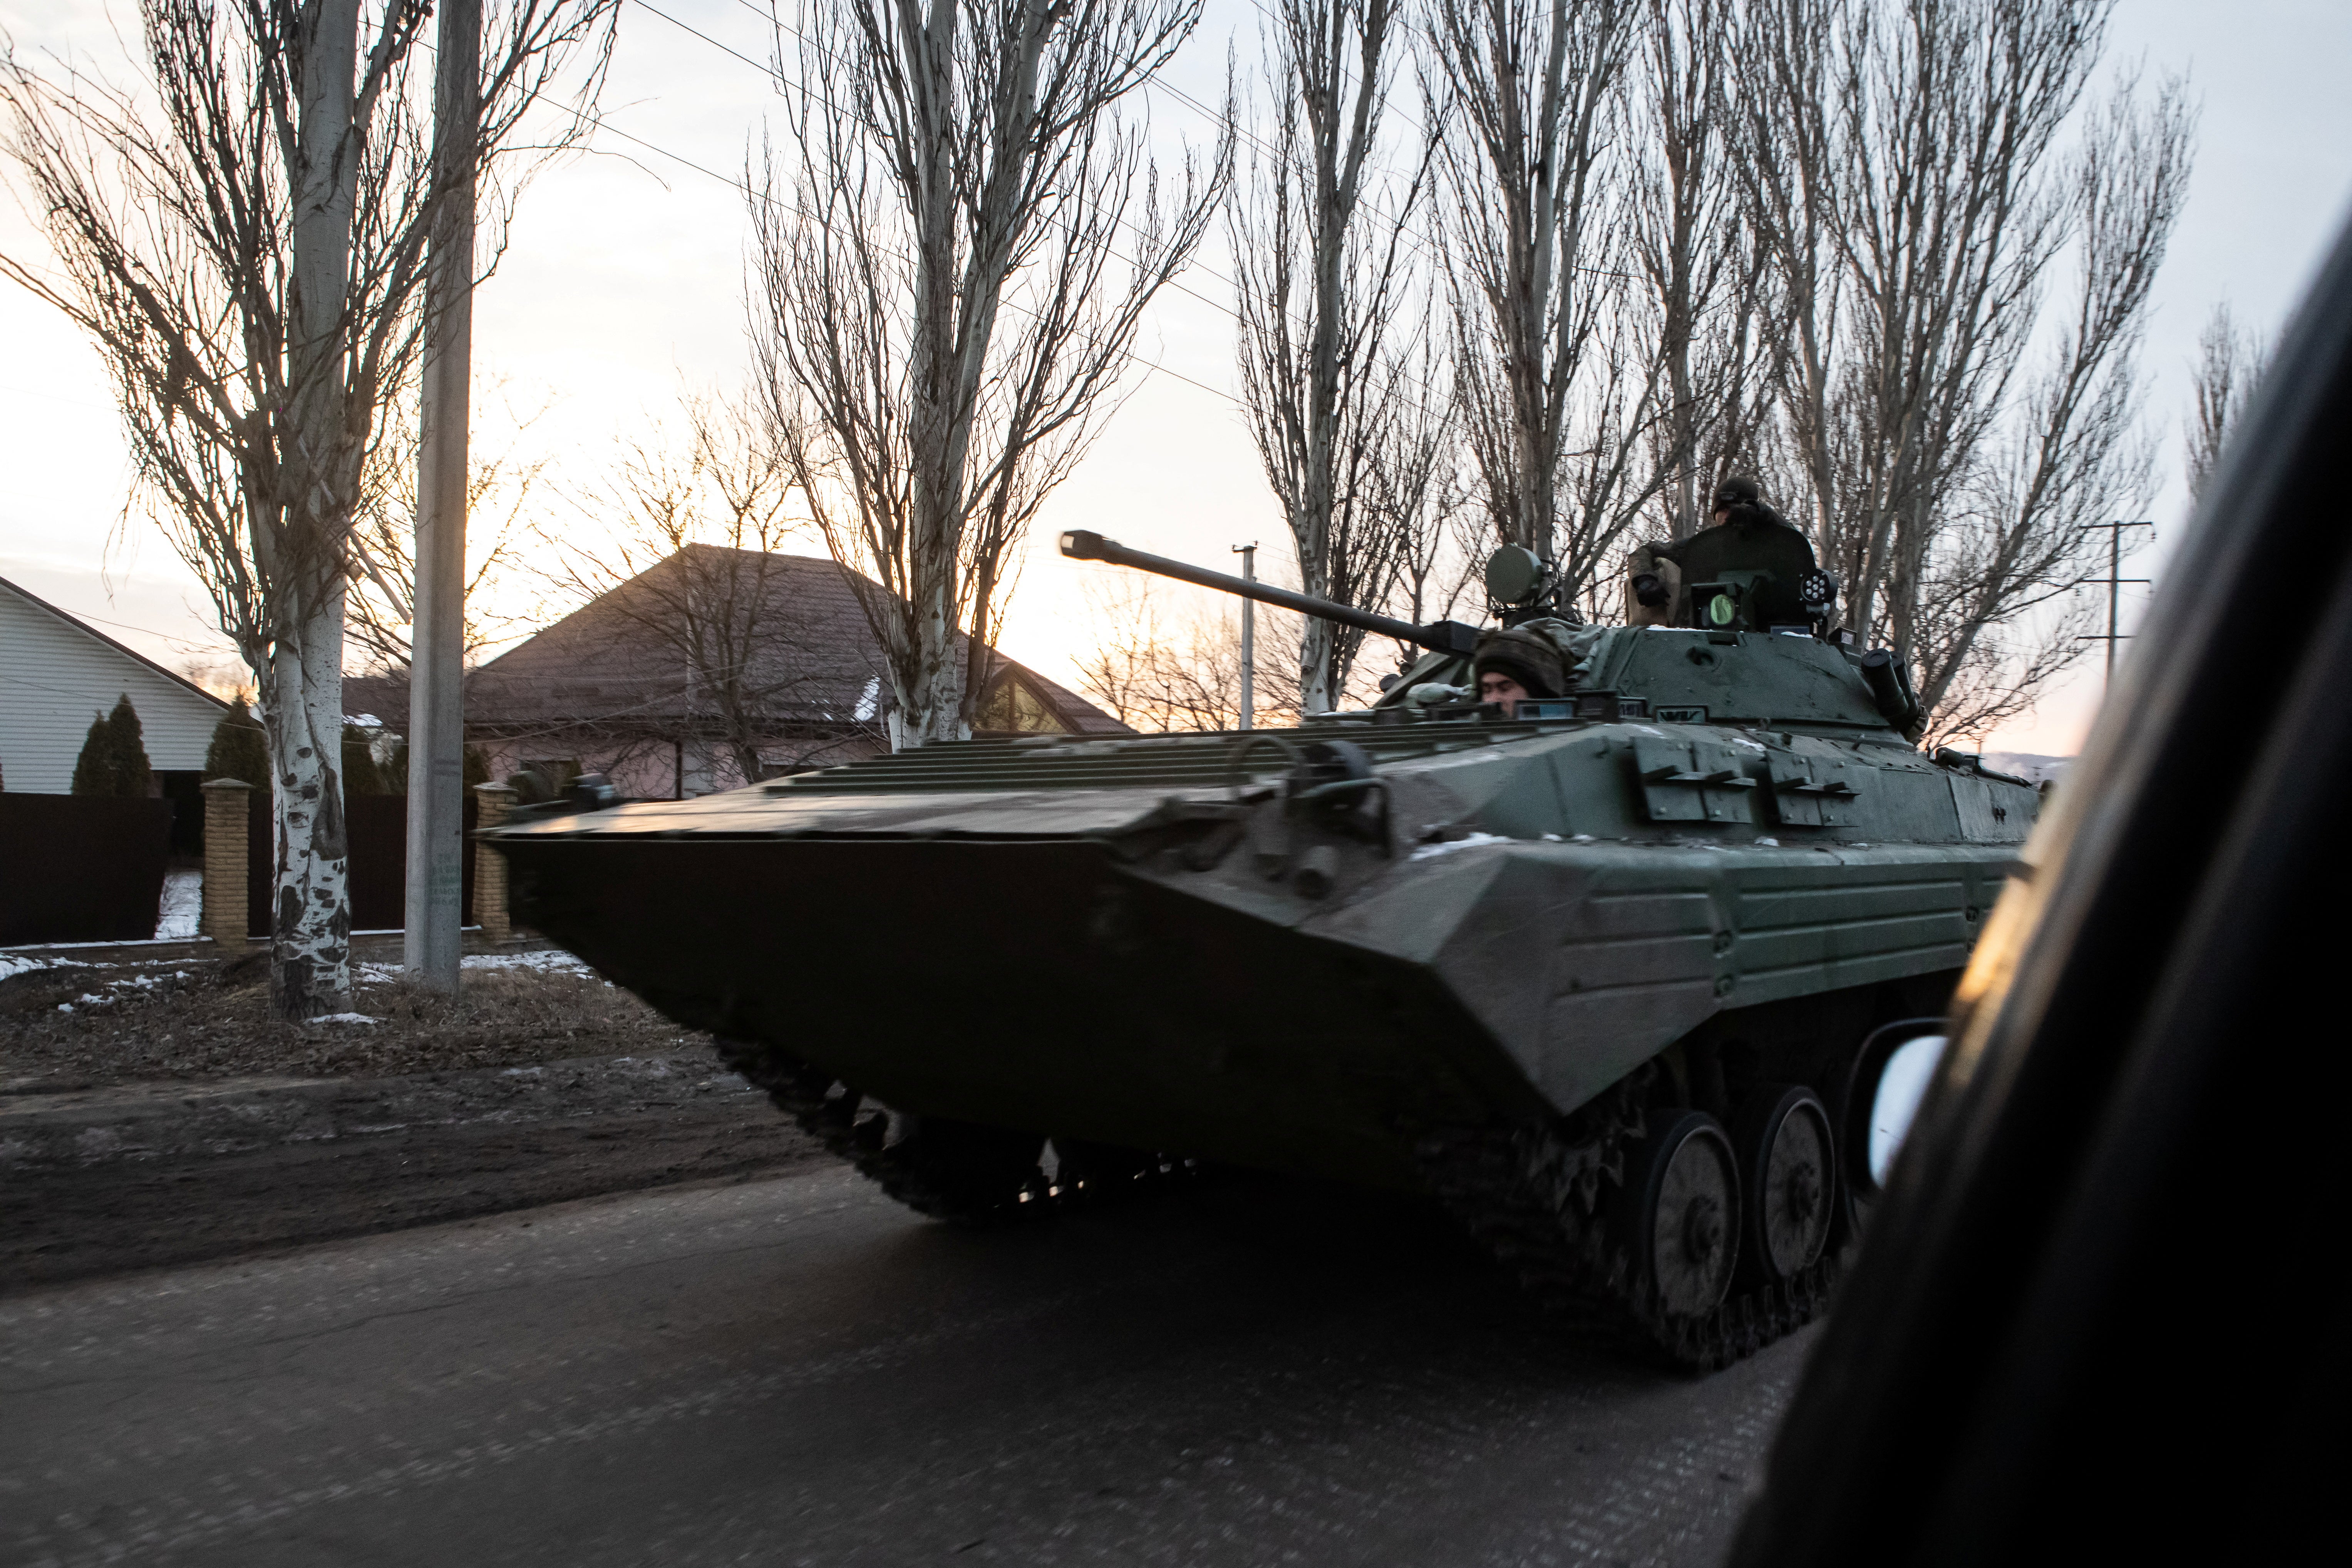 Ukrainian servicemen drive along a street with BMP-2 infantry fighting vehicle in the frontline town of Bakhmut in February 2023